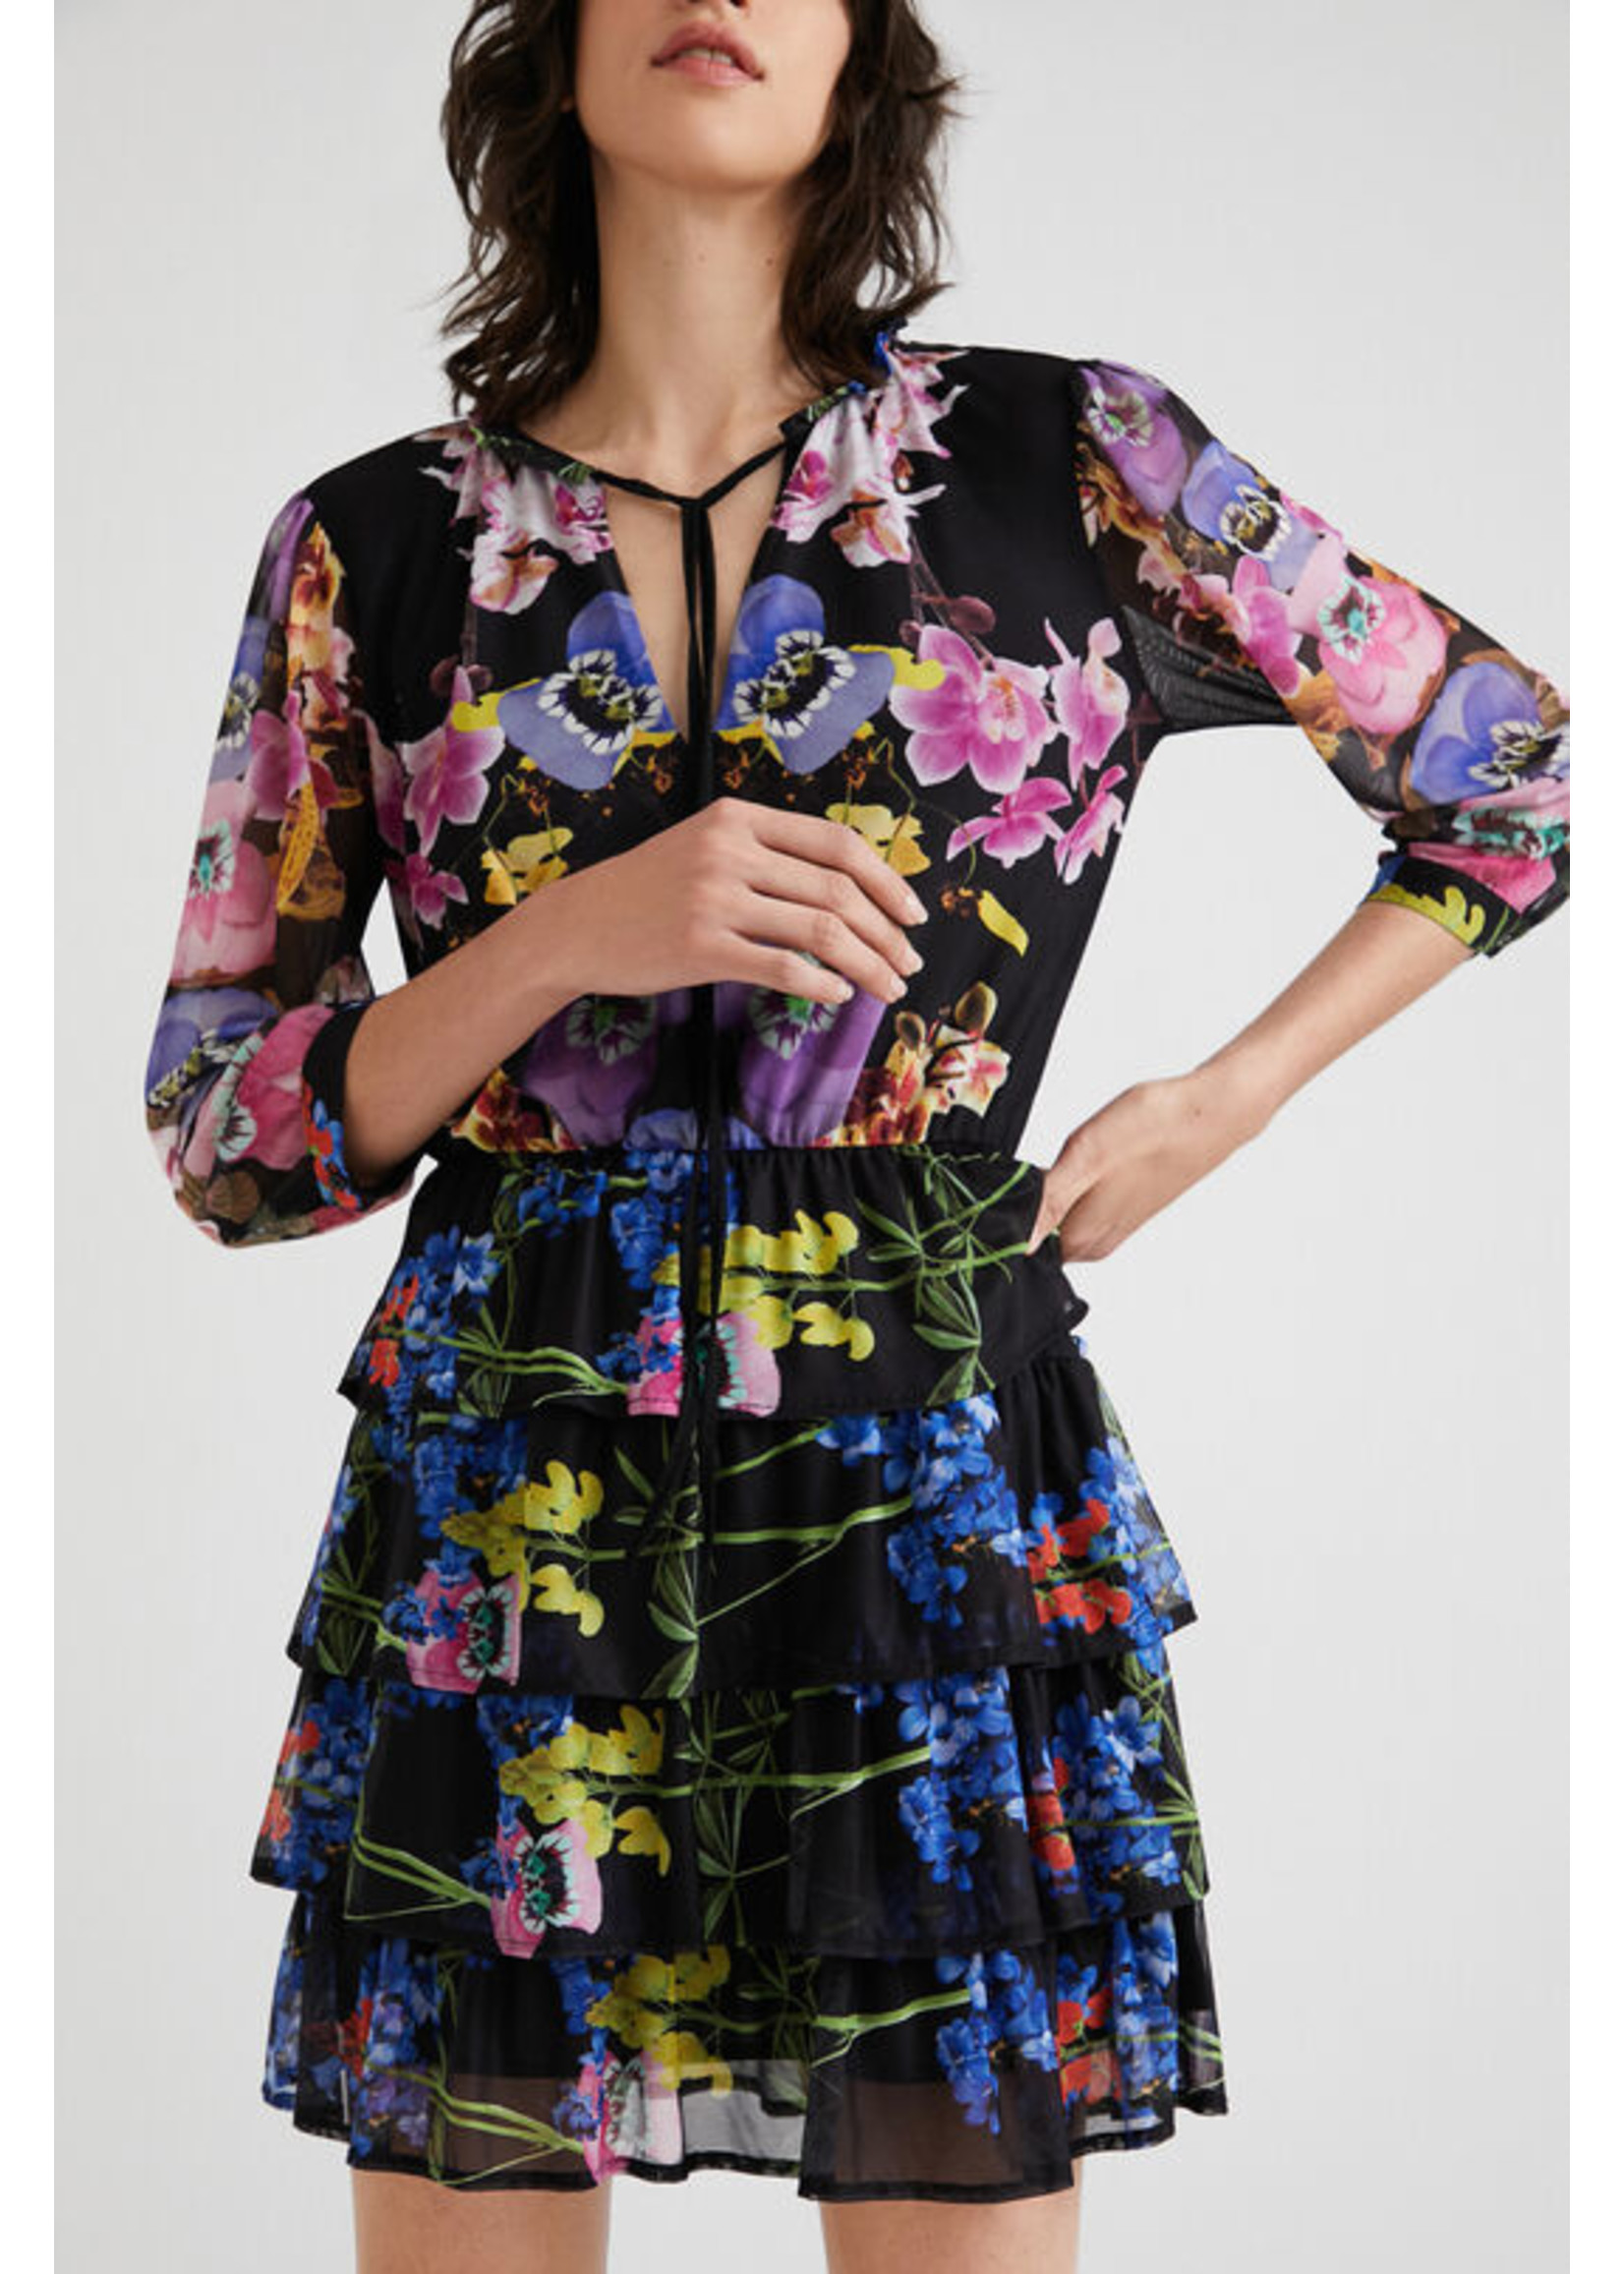 DESIGUAL Dress with long sleeves and orchid print designed by M. Christian Lacroix